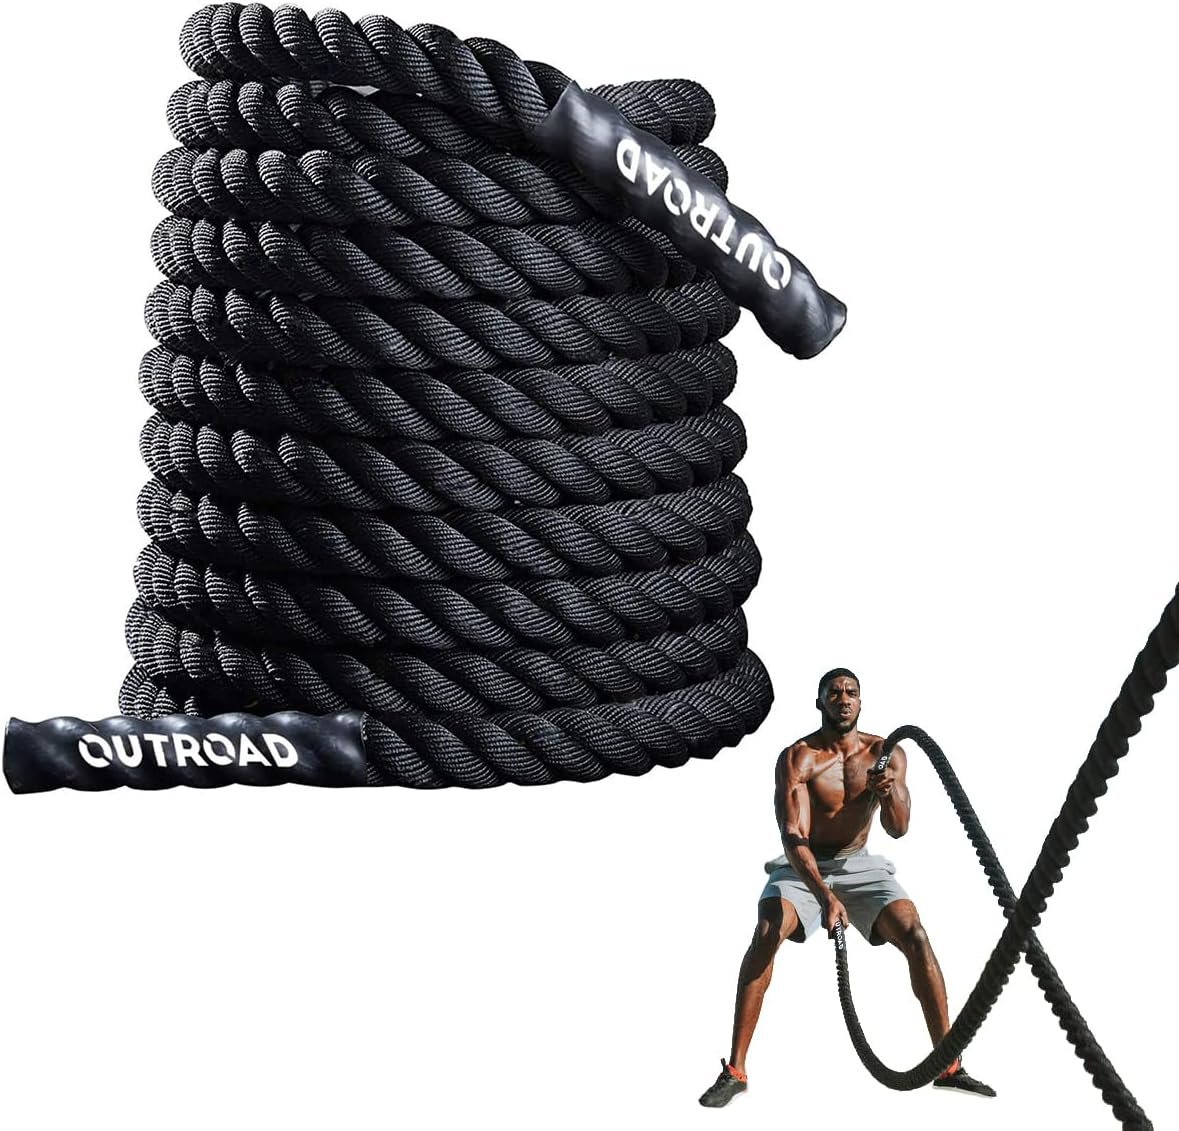 Outroad Battle Rope, 1.5" Diameter 30ft Poly Dacron Workout Exercise